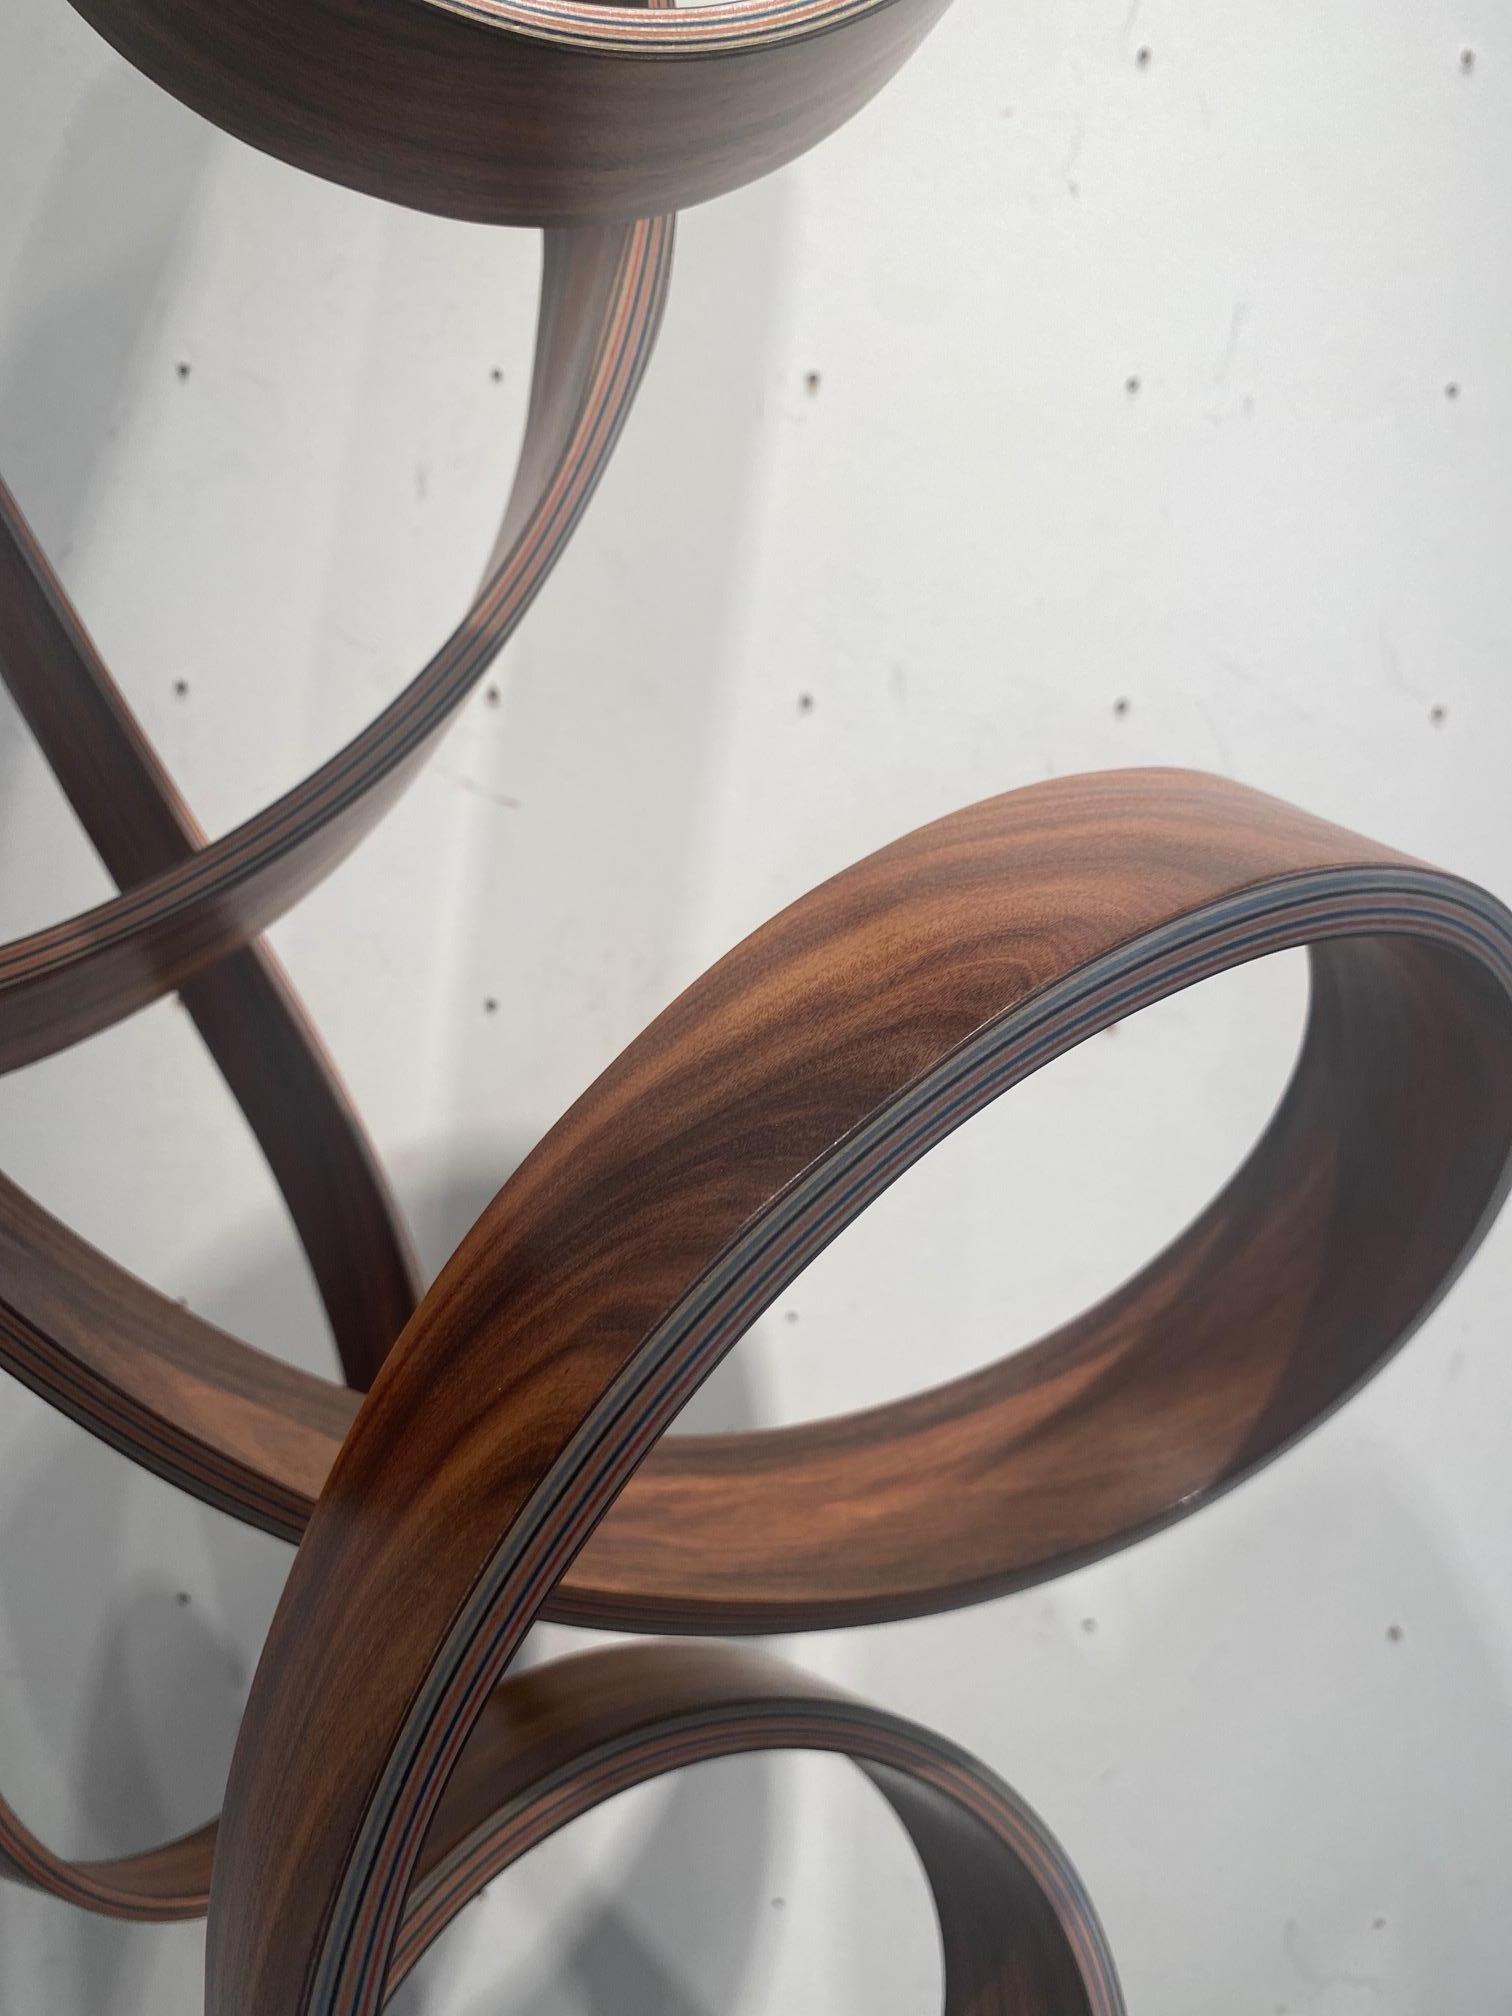 MWT-curvilinear minimalist maple wood sculpture defying gravity by Jacinto Moros 1